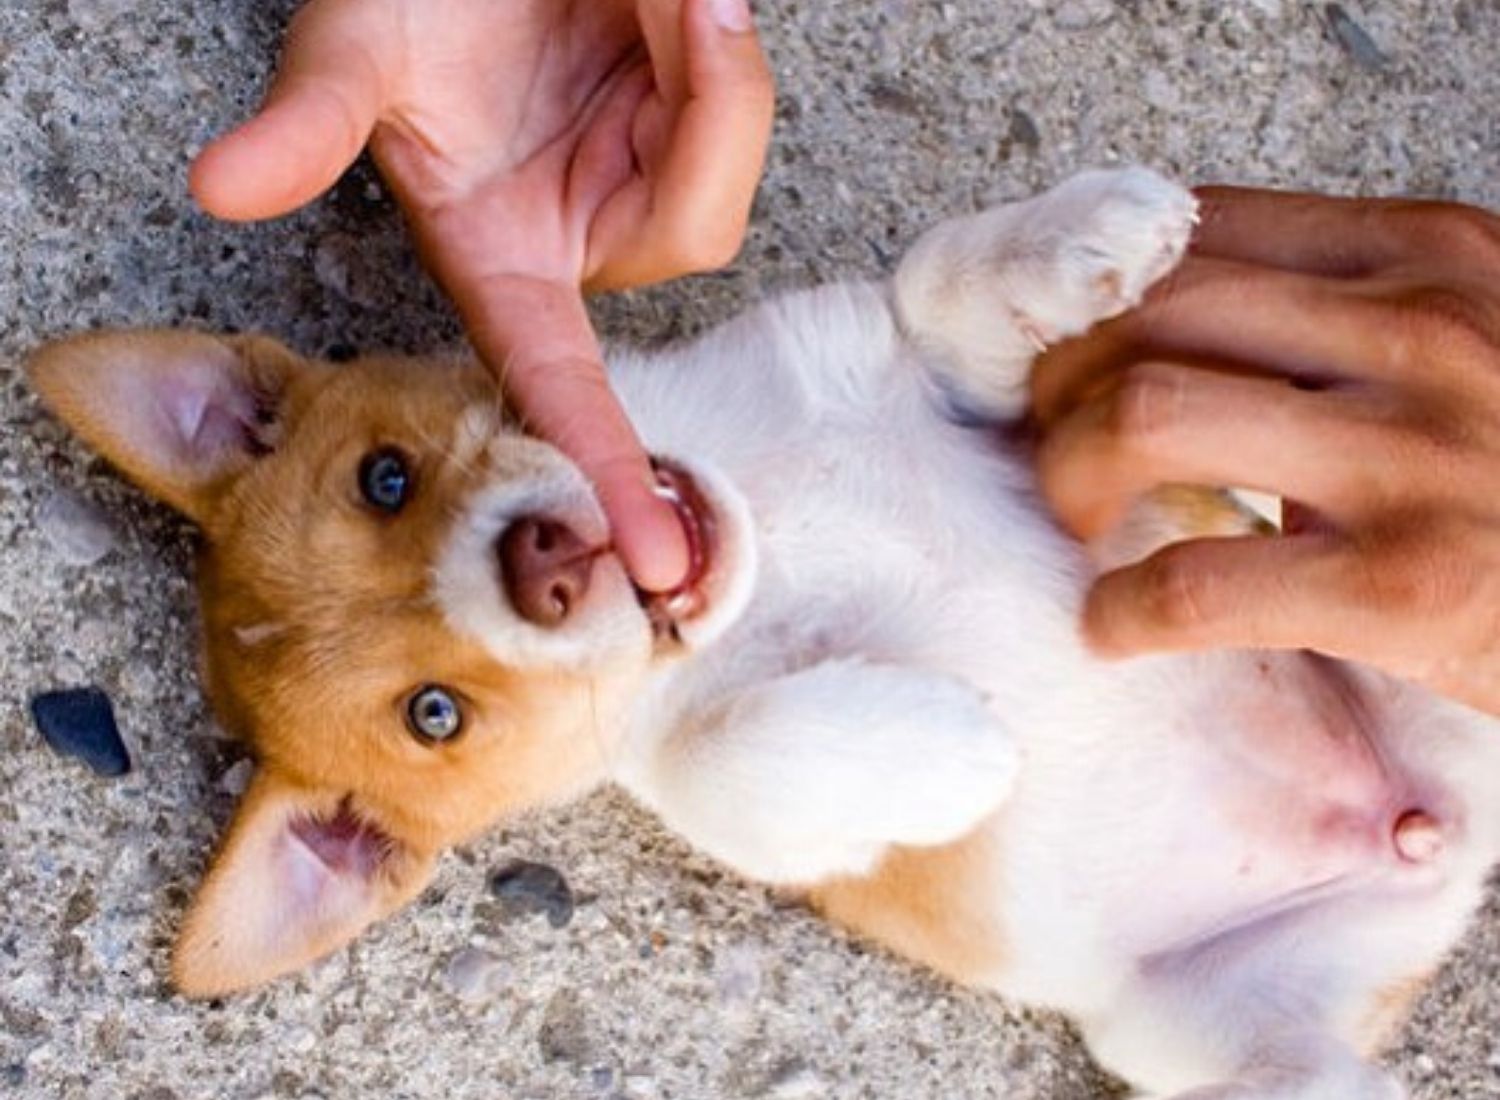 Why do Pooches love their belly rubs?